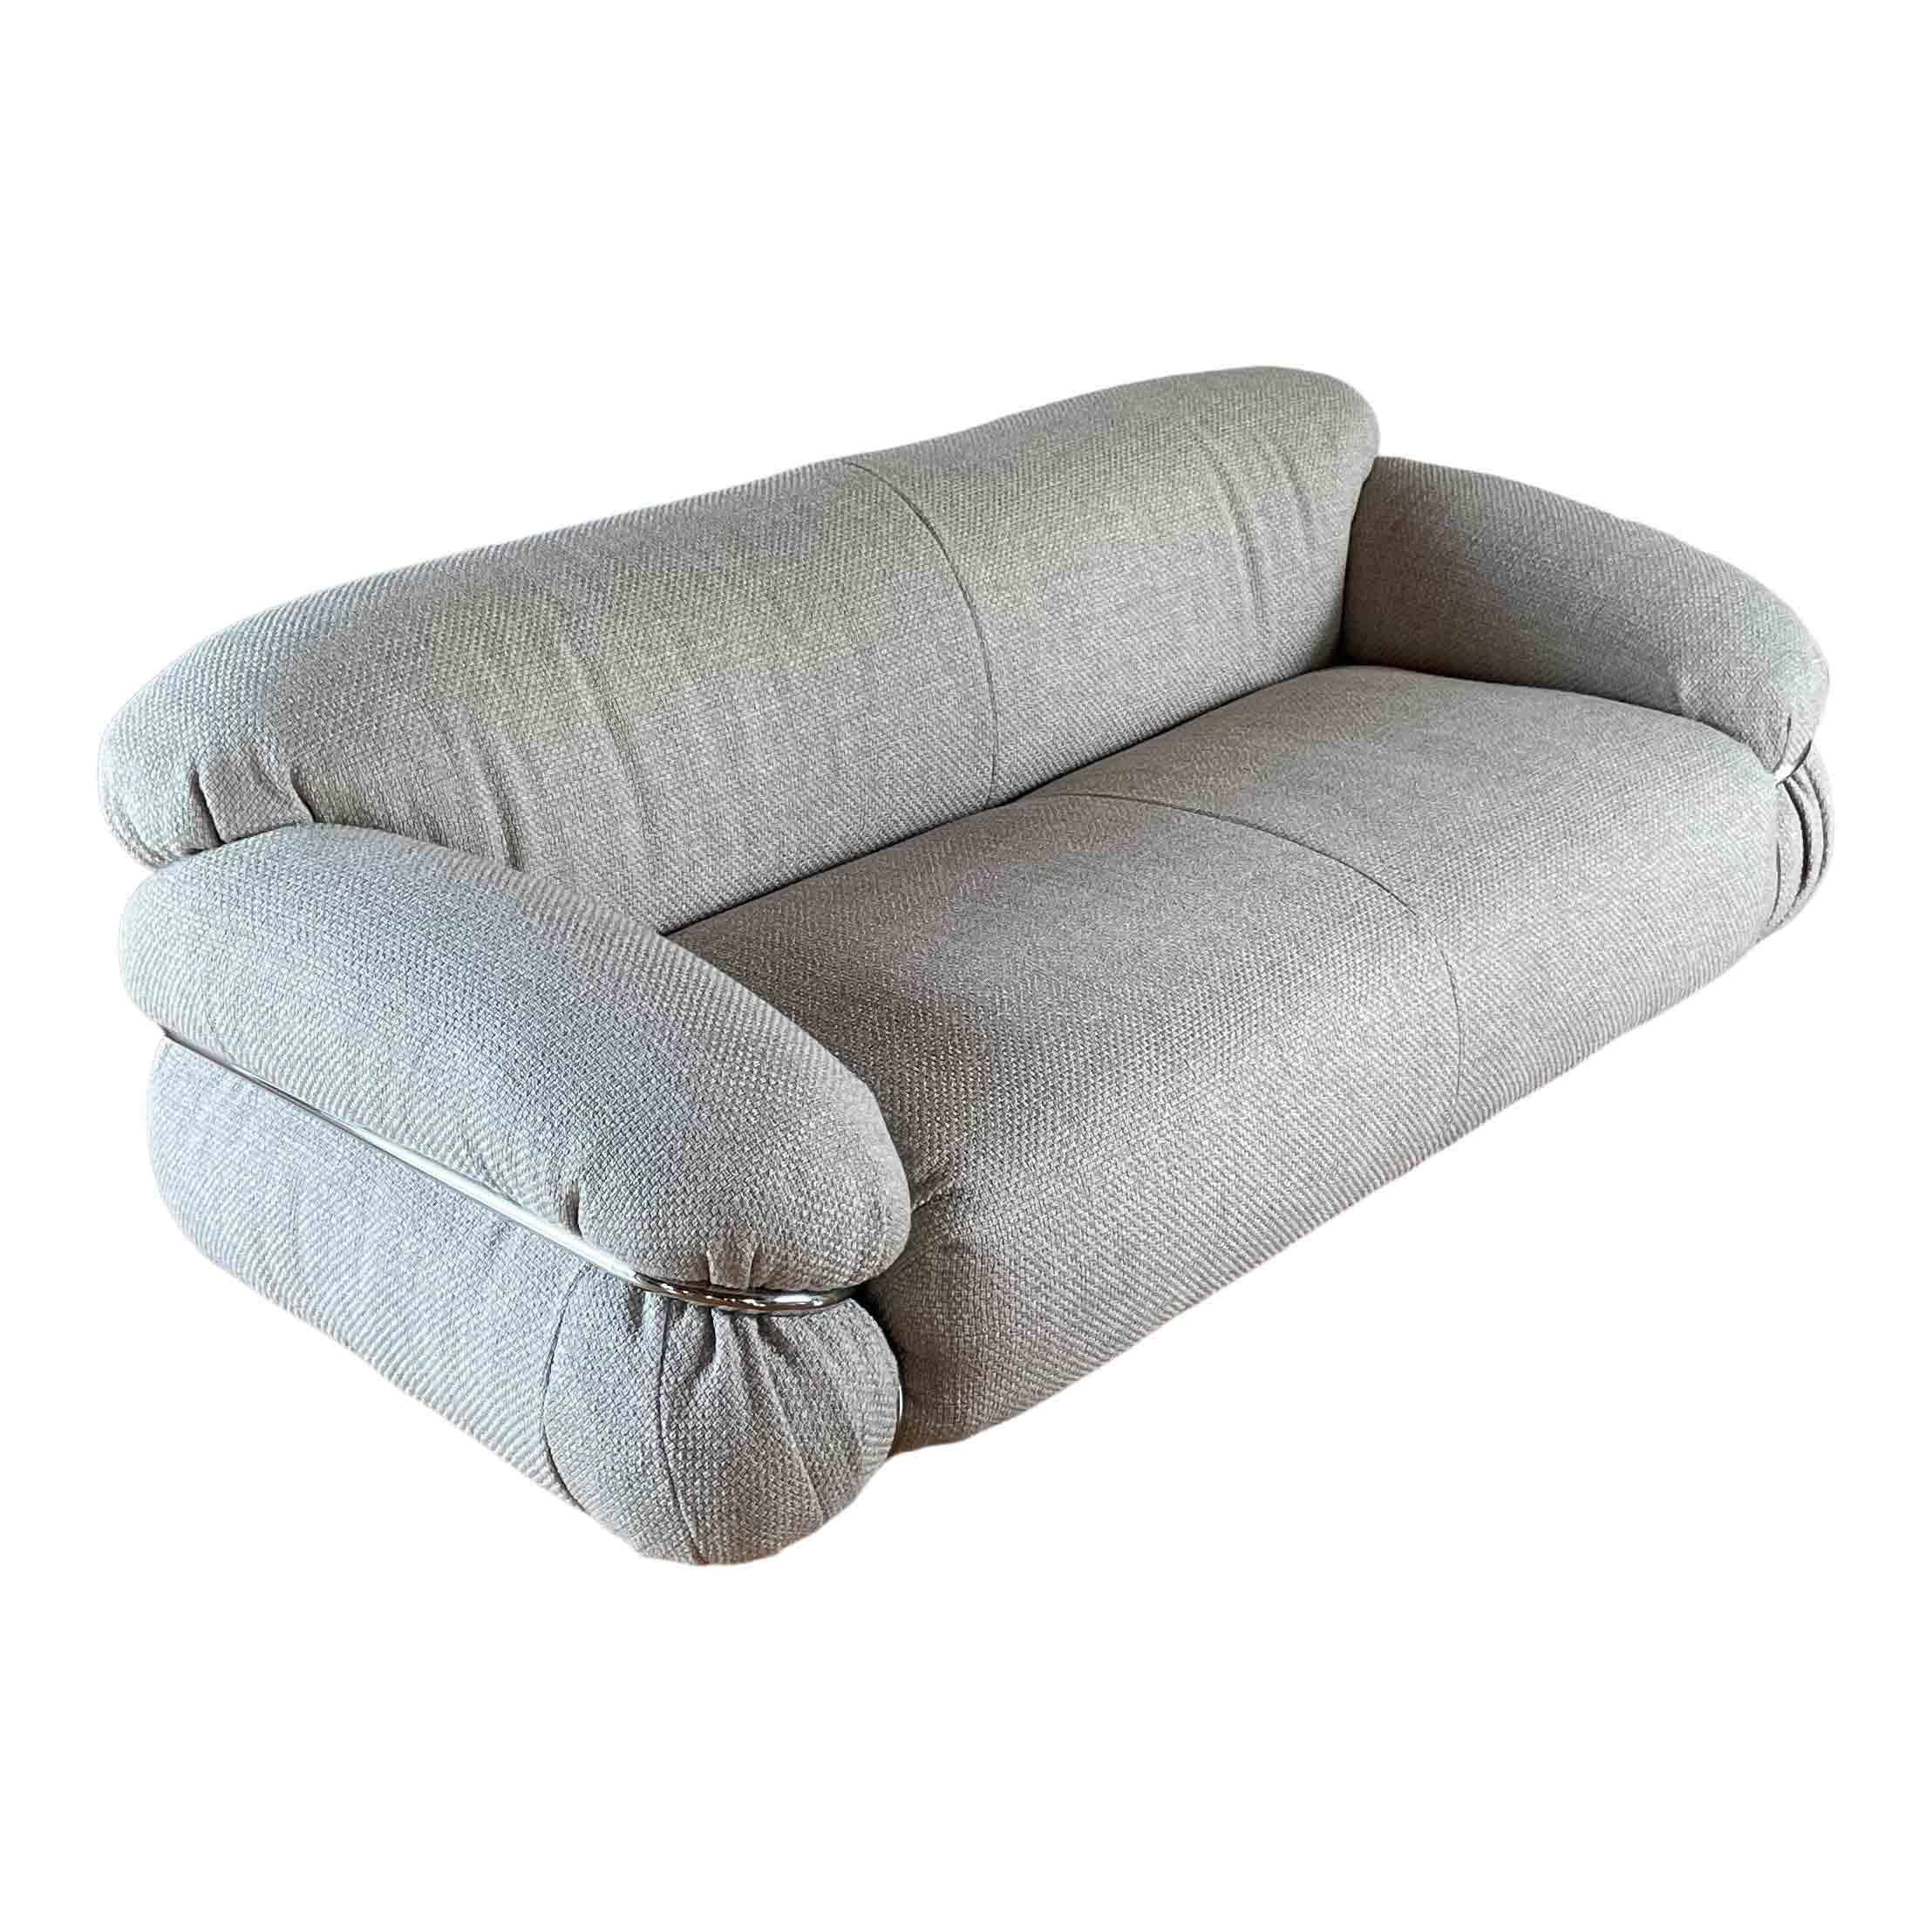 Space Age Gianfranco Frattini Beige Wool Bouclé Sesann Two-Seater Sofa for Cassina, 1972 For Sale